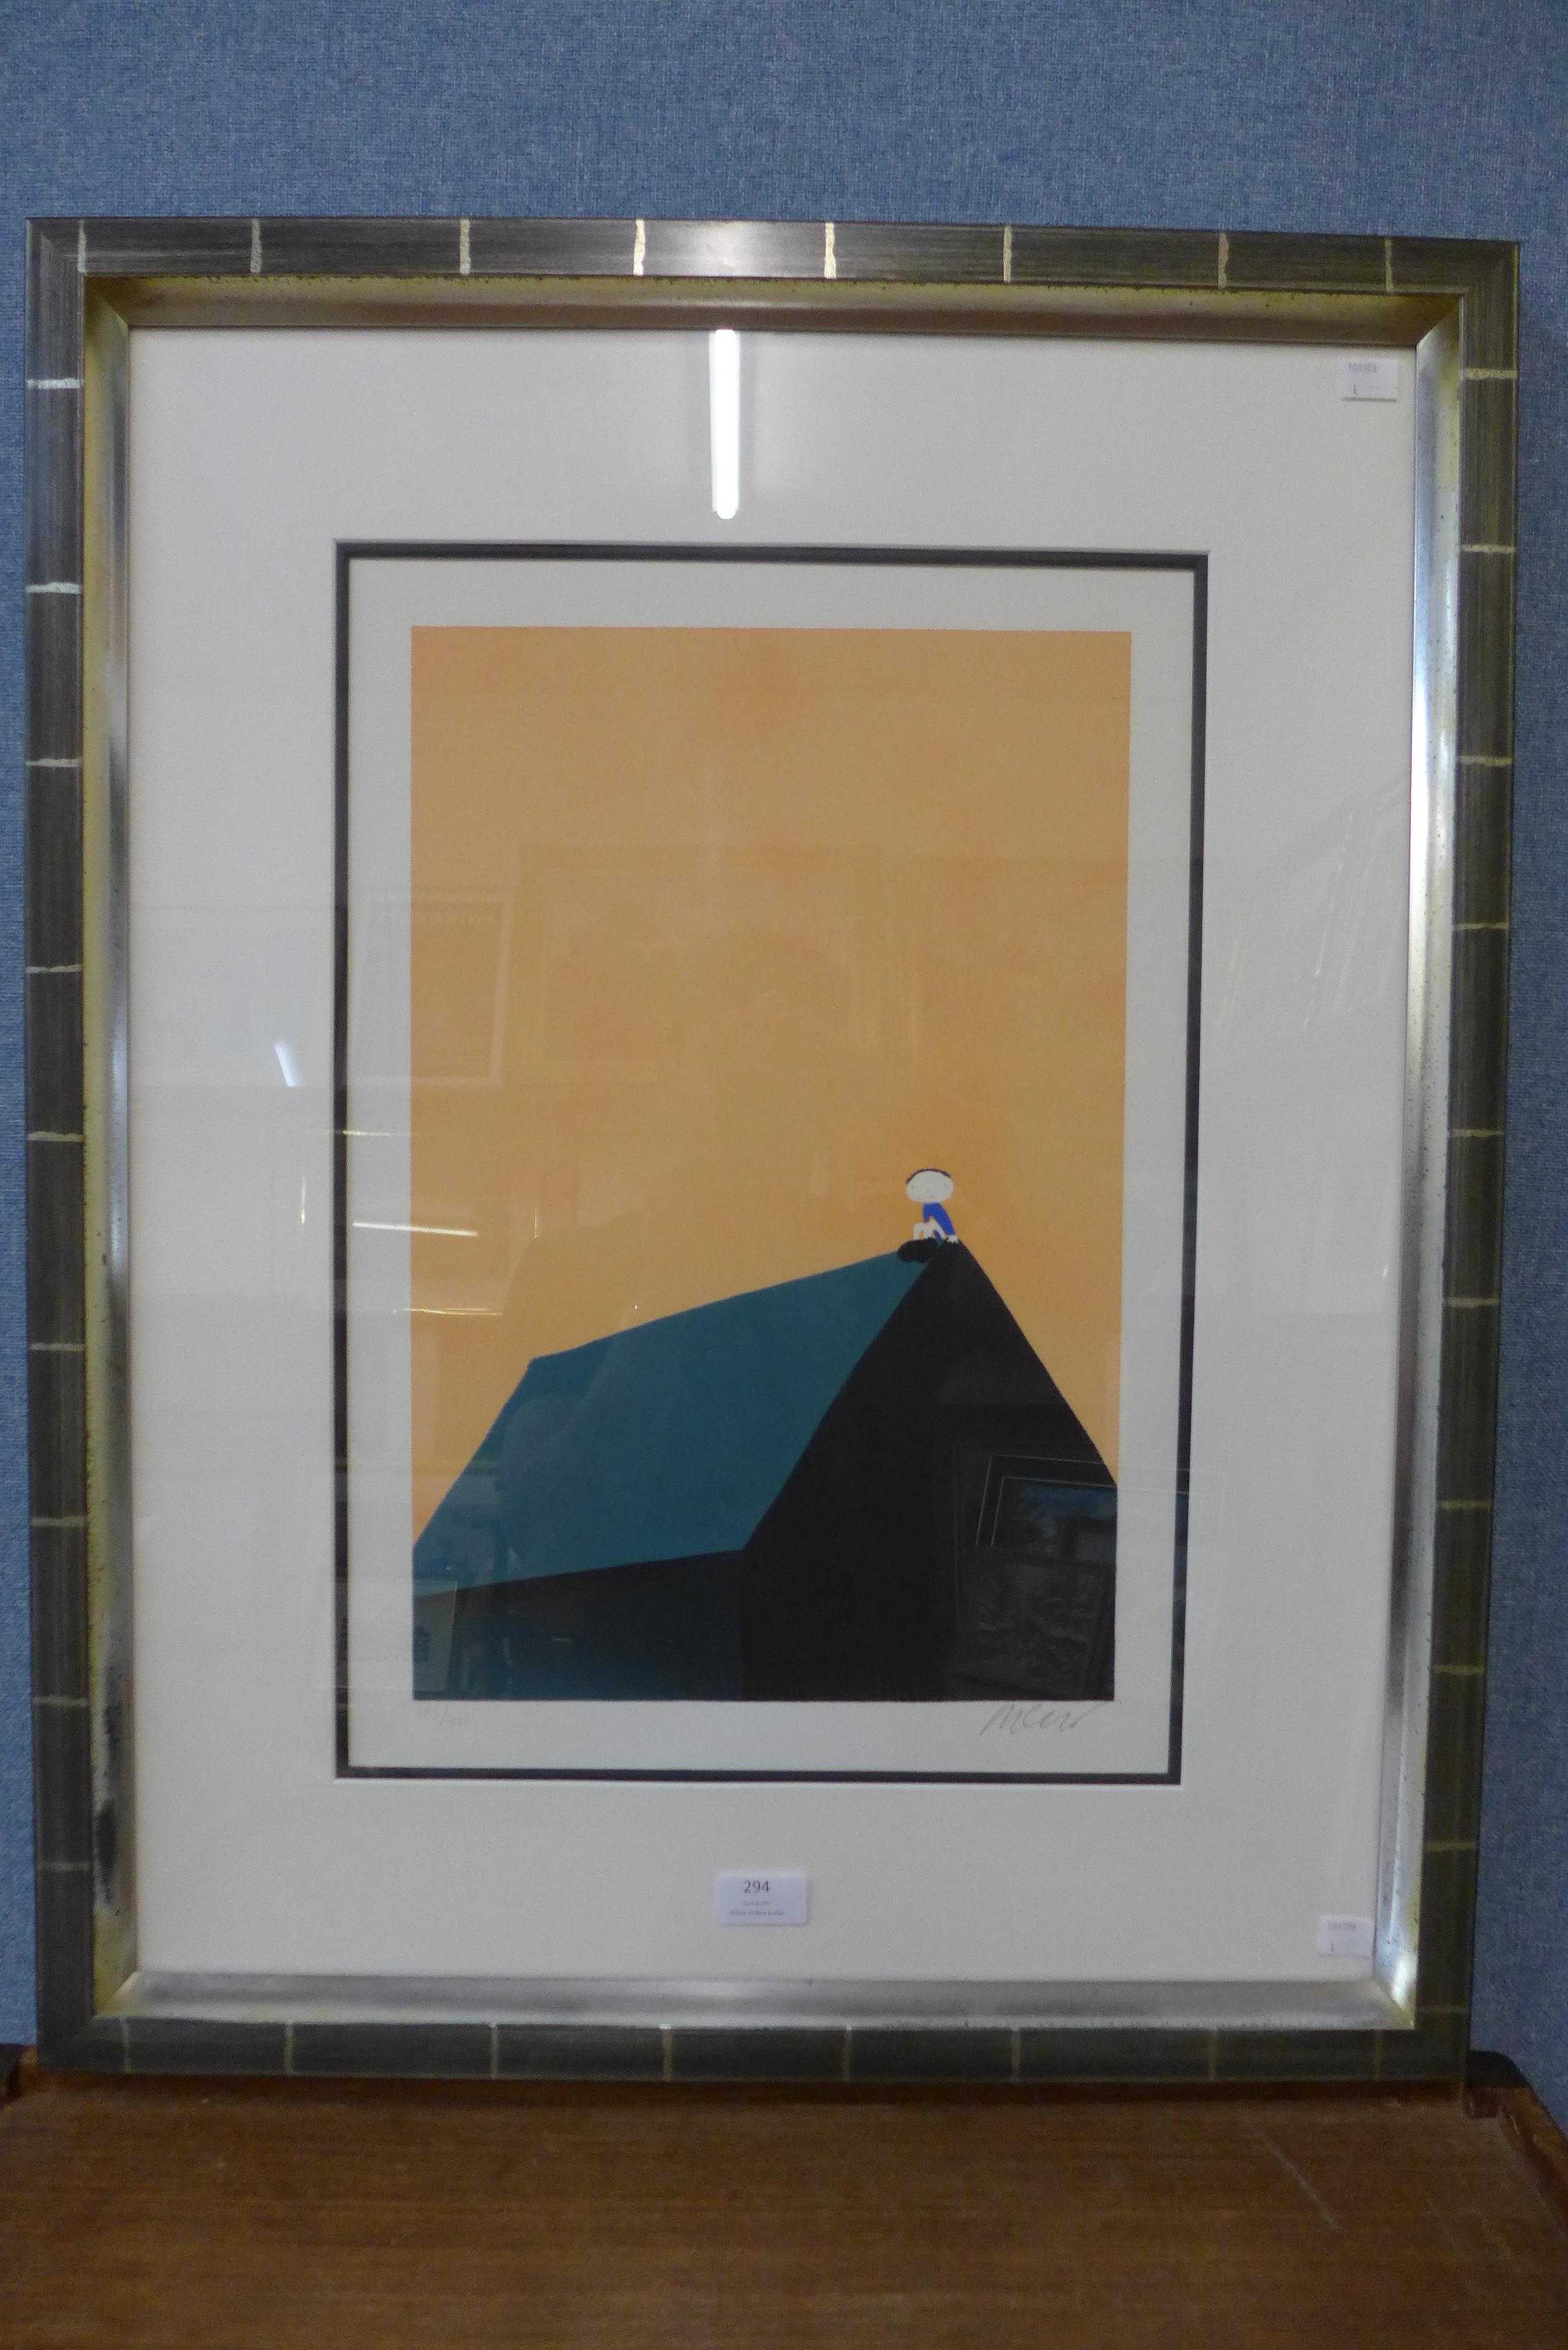 Mackenzie Thorpe, Boy on the Roof, signed limited edition print, no. 183/395, certificate of